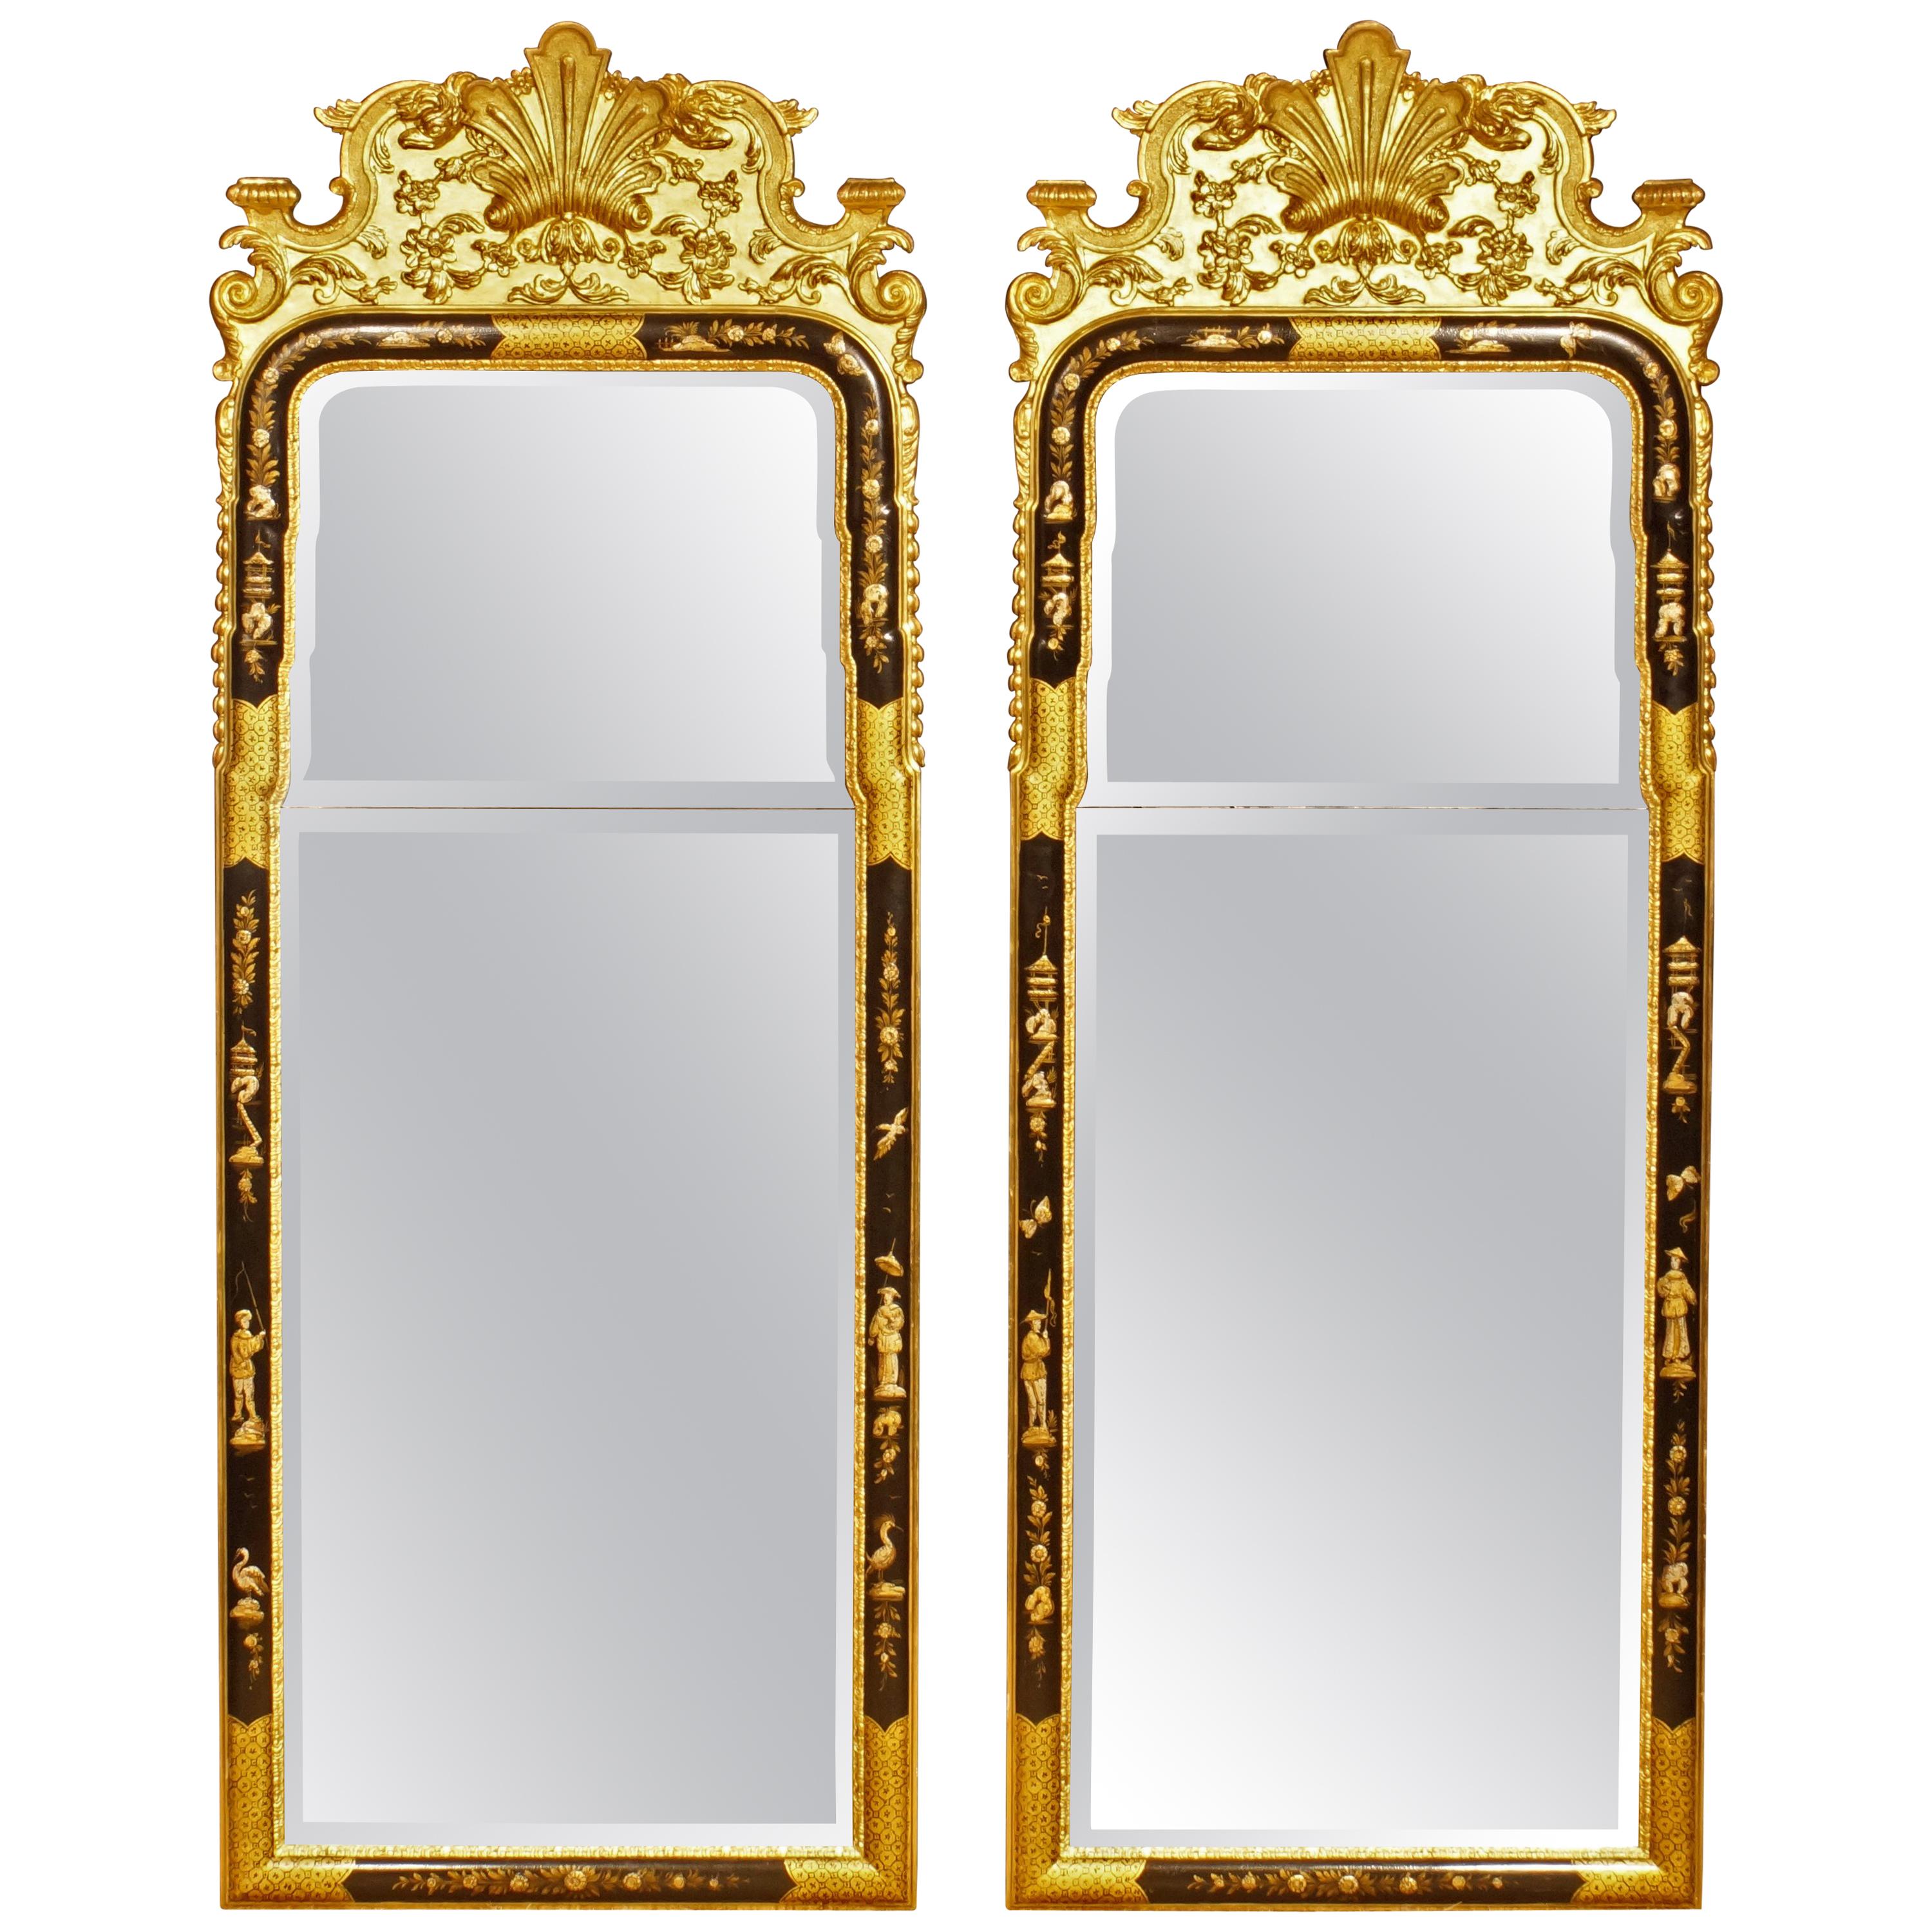 Pair of Early 20th Century Chinnoiserie Framed Mirrors in the Queen Anne Style For Sale